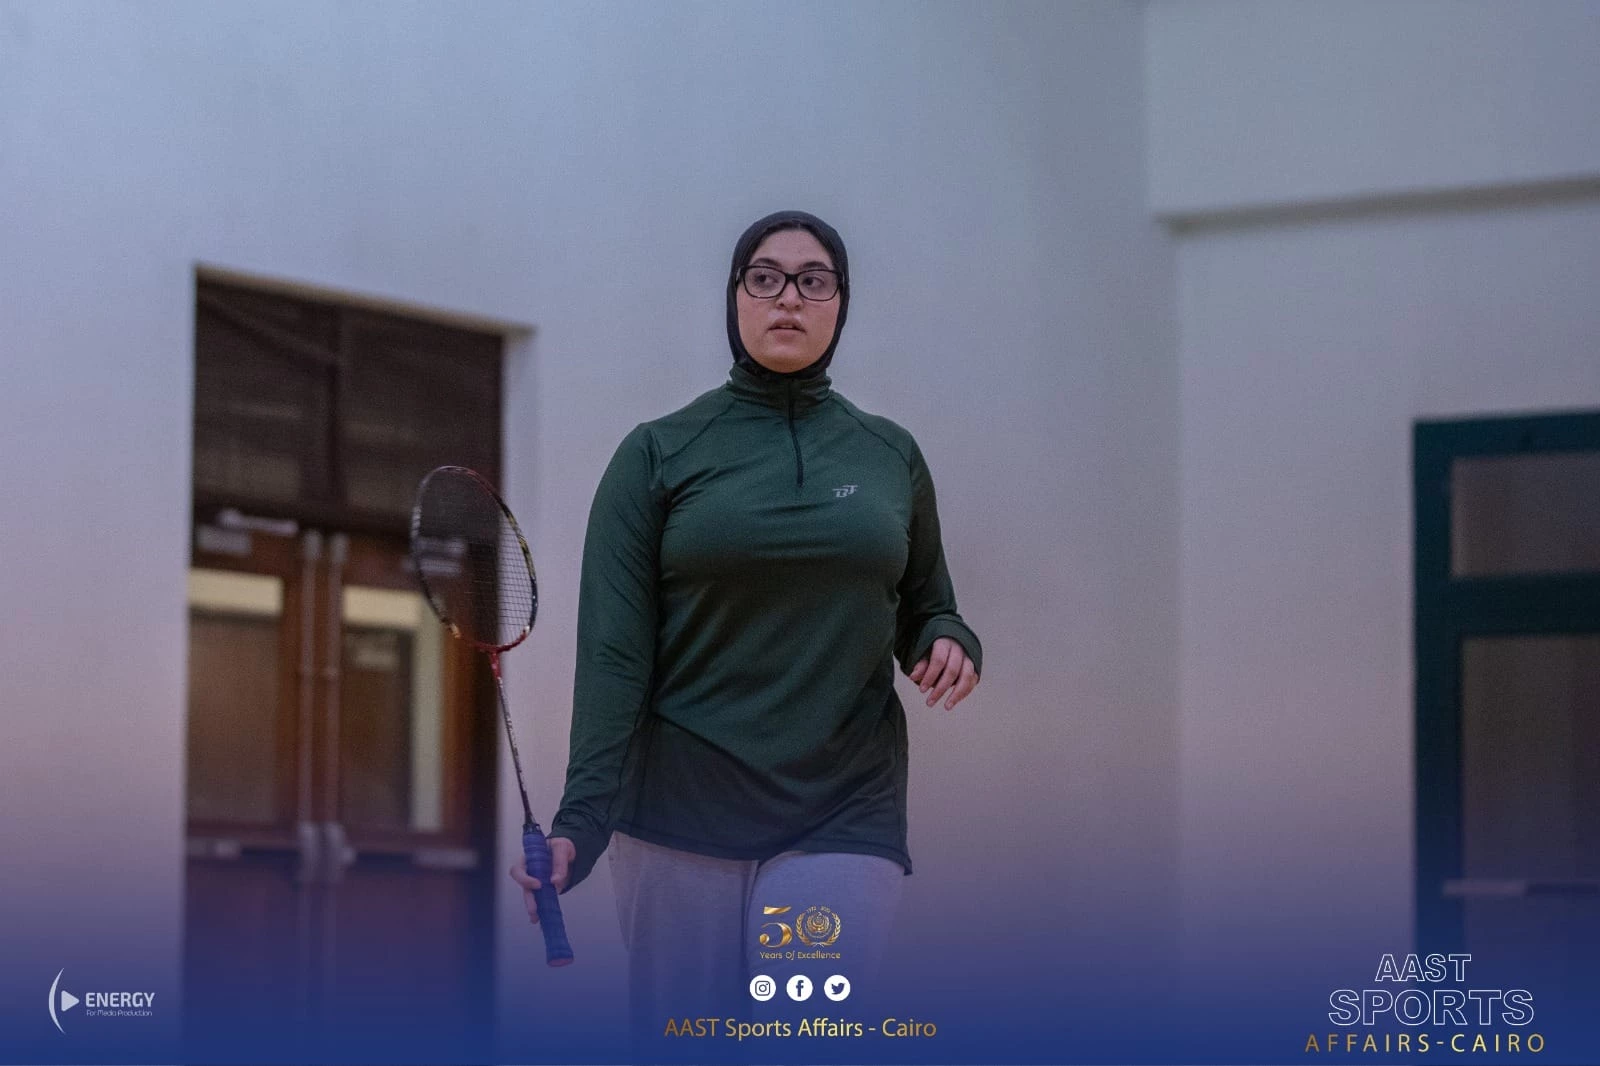 The national team of the Academy in Cairo for badminton is crowned the champion of the student championship and the runner-up of the student championship of the fifth sector of private universities4